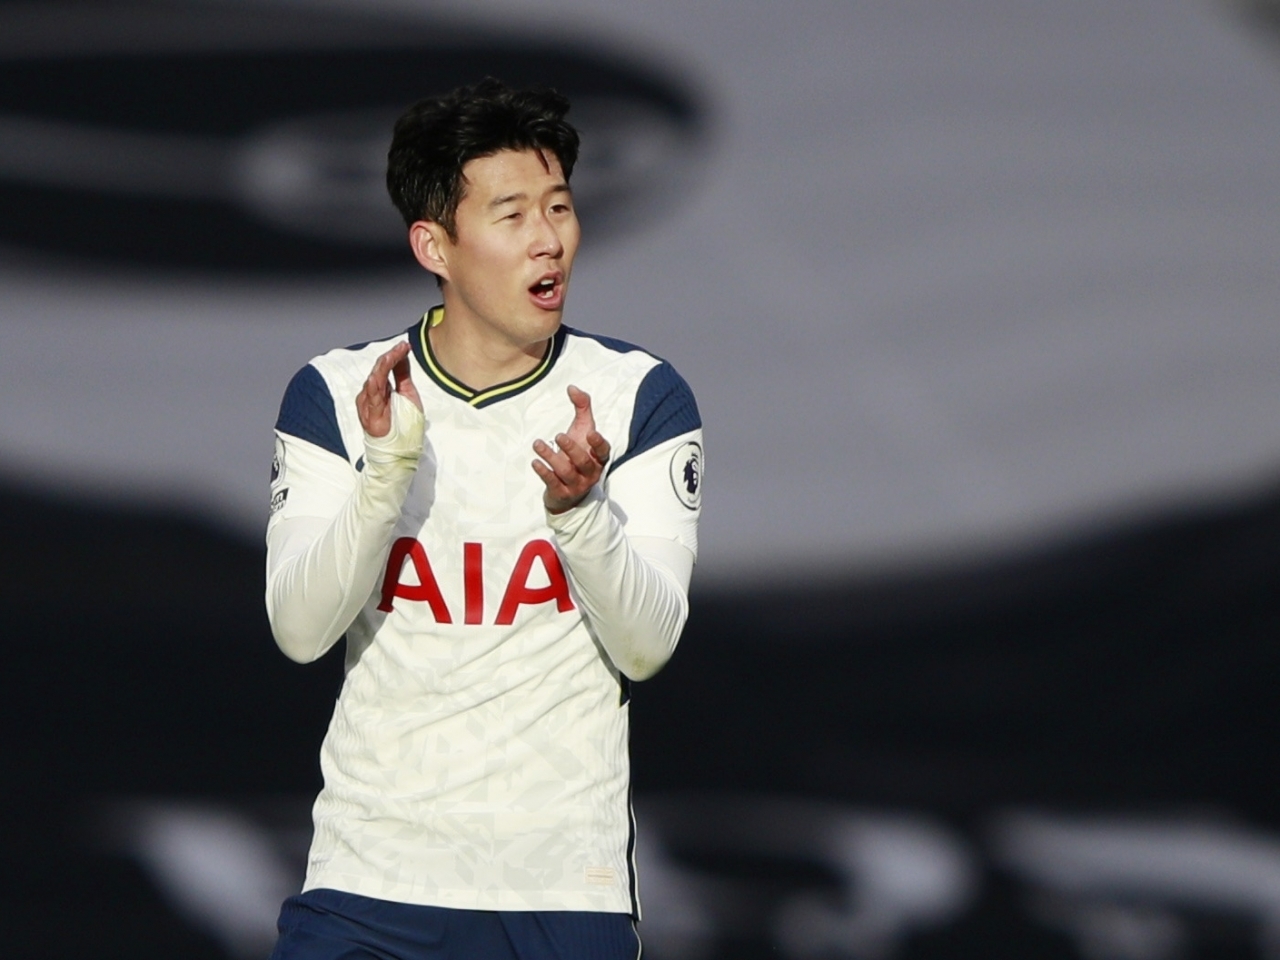 Son Heung-min of Tottenham Hotspur celebrates his goal against Leeds United during the clubs' Premier League match at Tottenham Hotspur Stadium in London on Saturday. (Reuters-Yonhap)